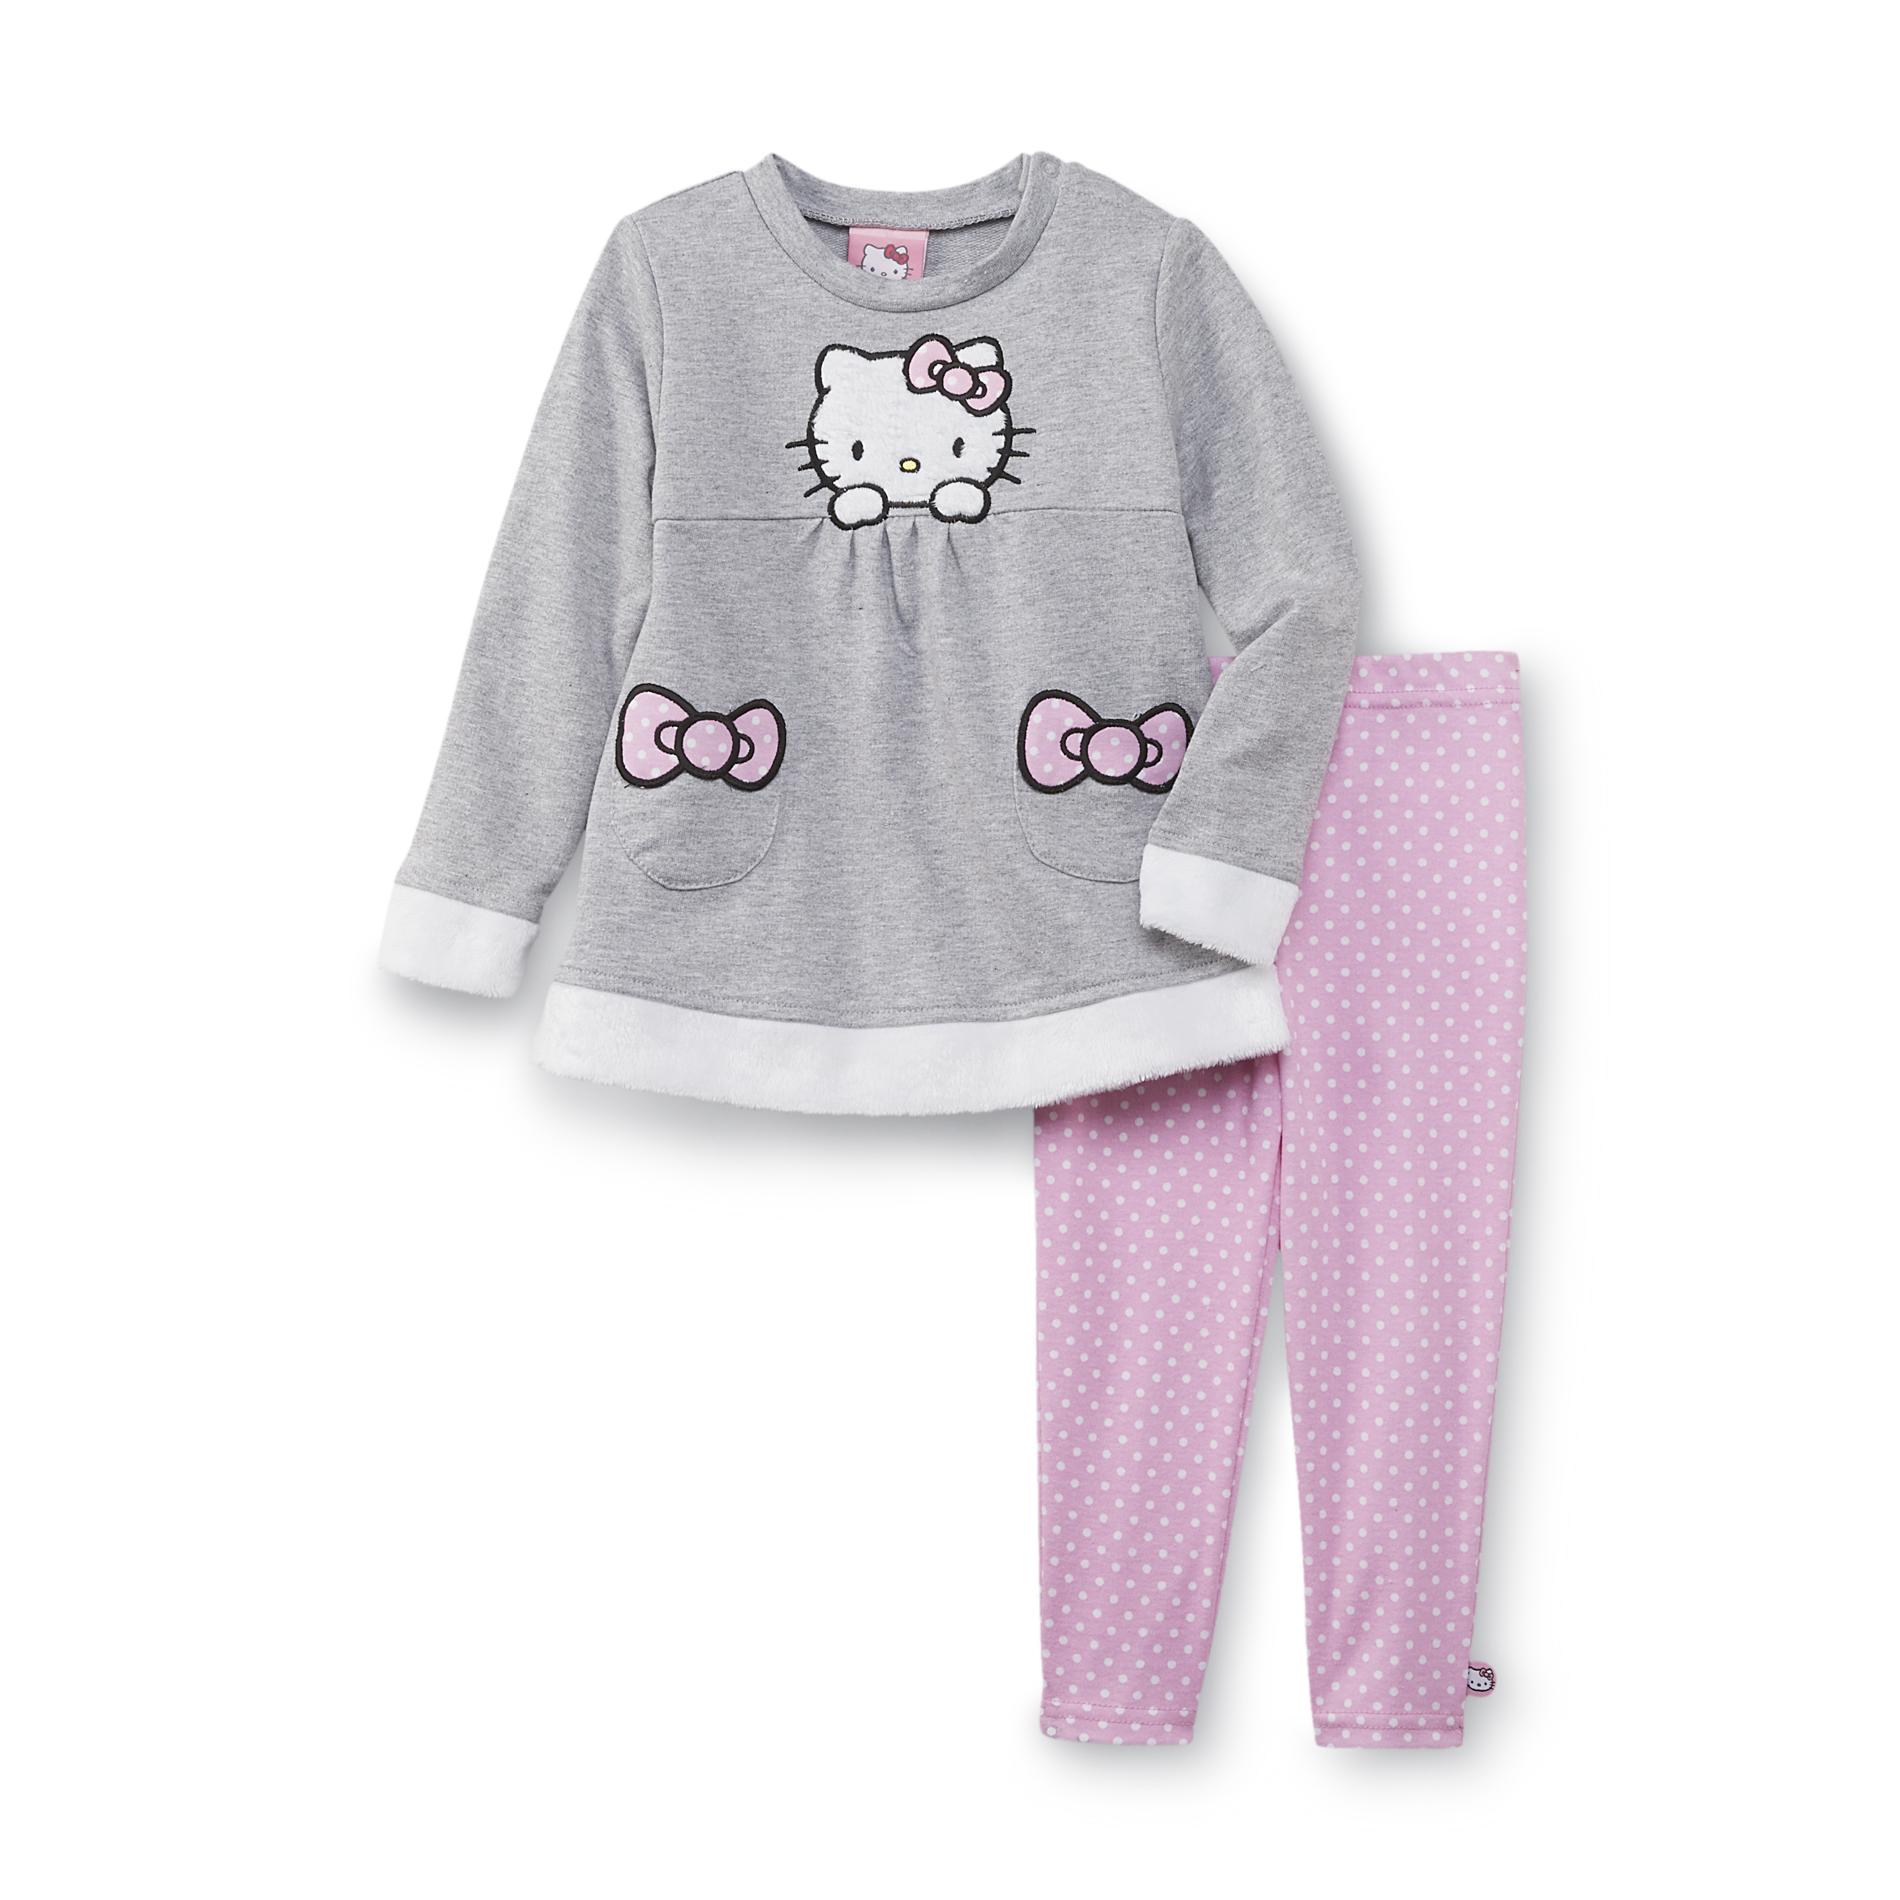 Hello Kitty Infant & Toddler Girl's French Terry Knit Tunic & Leggings